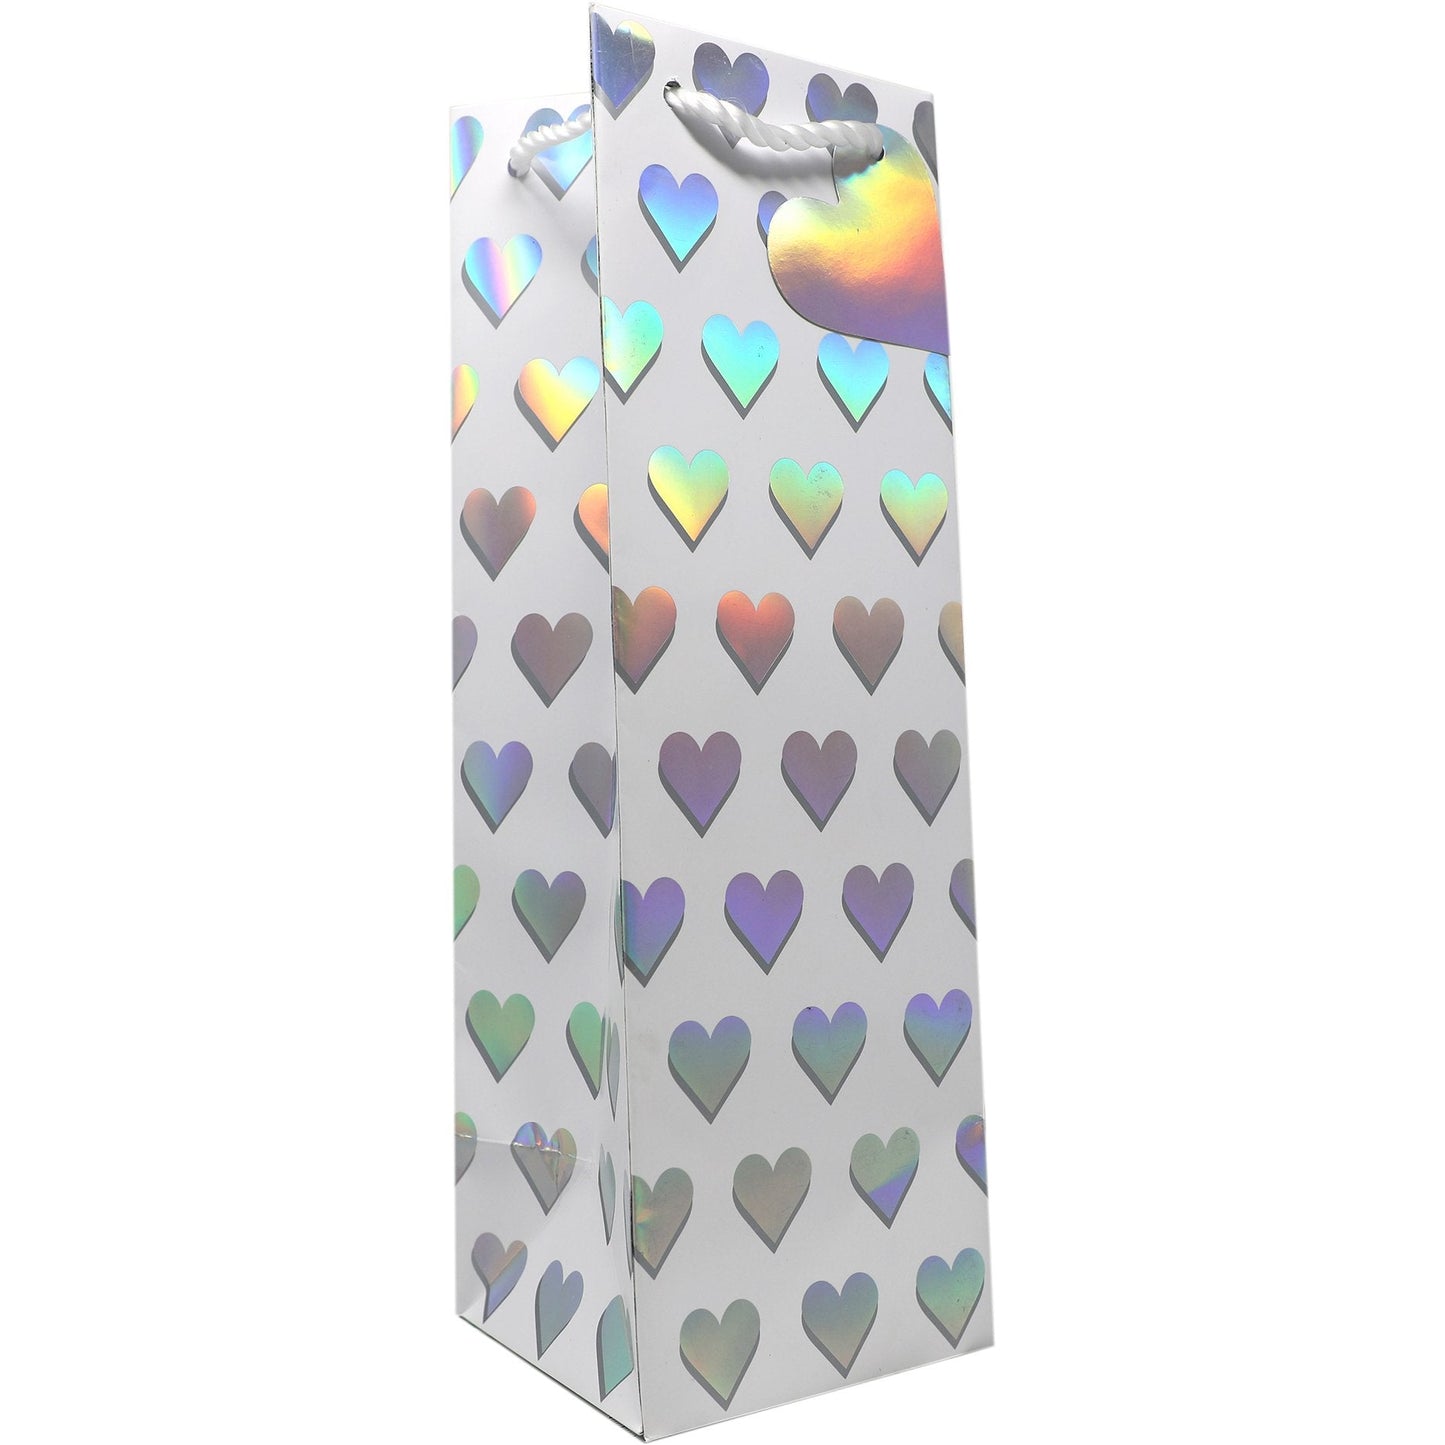 Present Paper - Wine Bottle Gift Bags - True Love with Holographic Accents - 12/30/60/120 Pieces